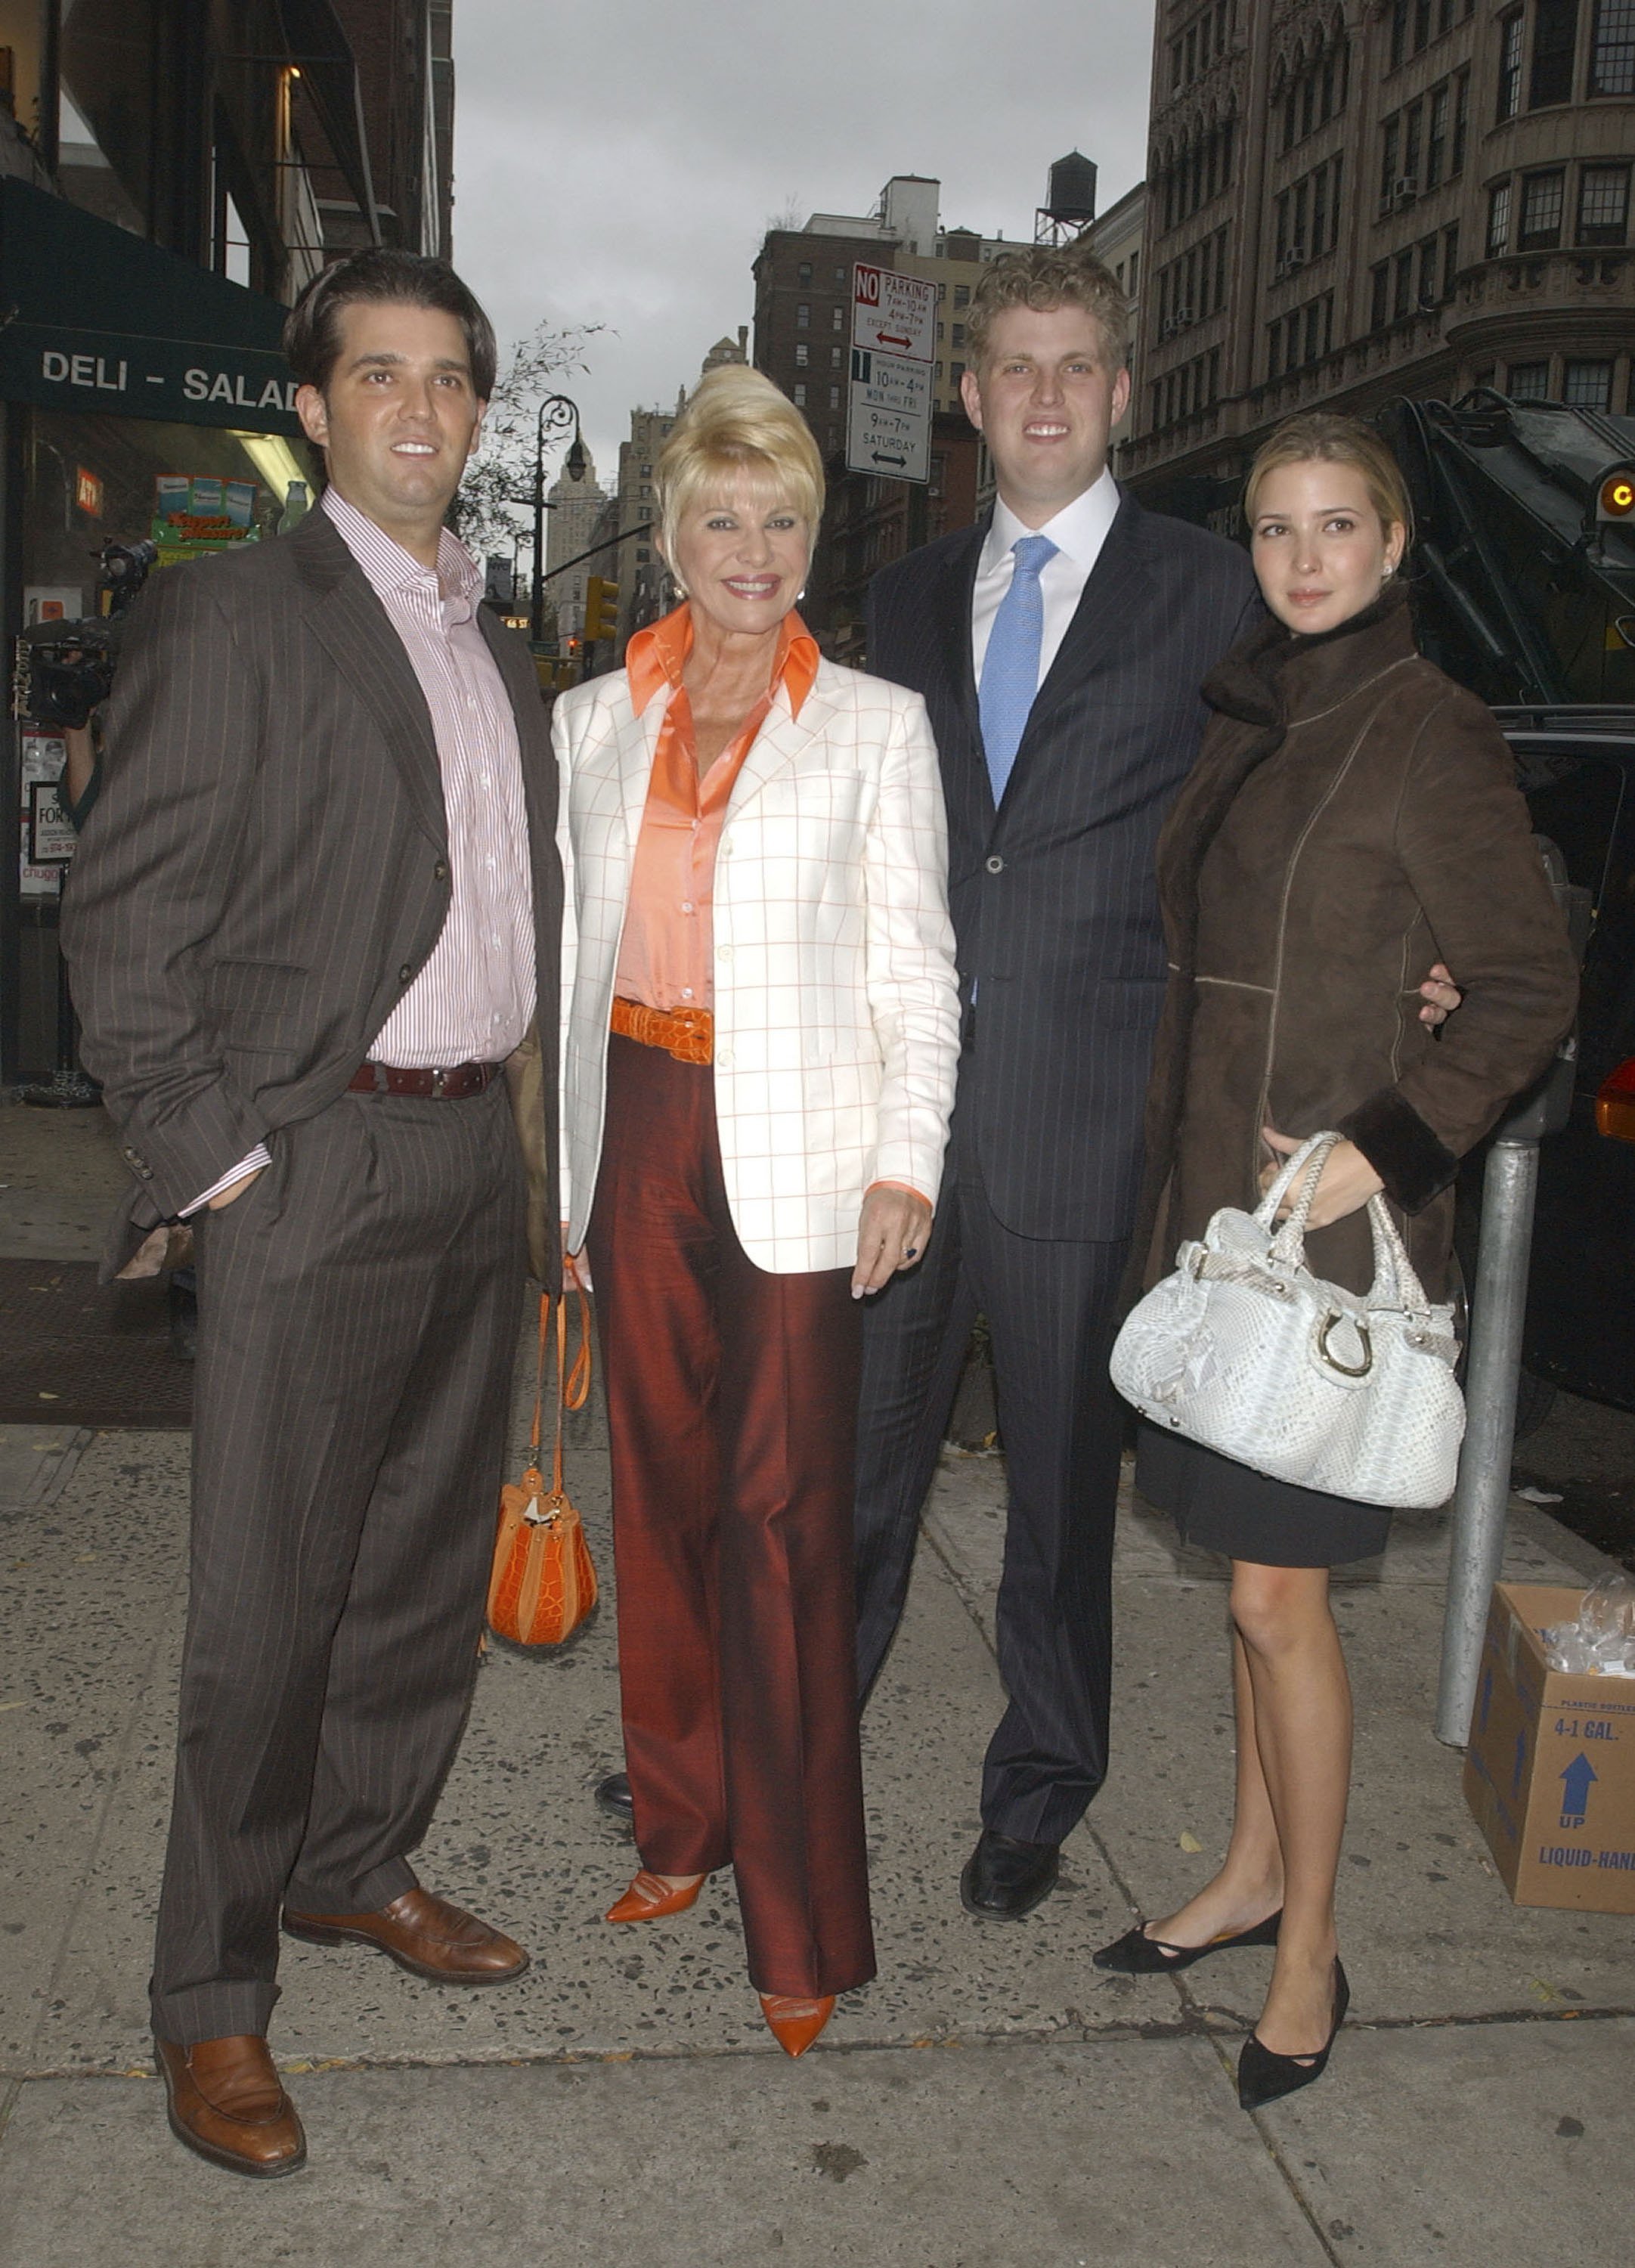 Ivana Trump poses with her children, Donald Trump Jr., Eric Trump, and Ivanka Trump, after lunch at Frederick's Madison on November 16, 2006, in New York City. | Source: Getty Images